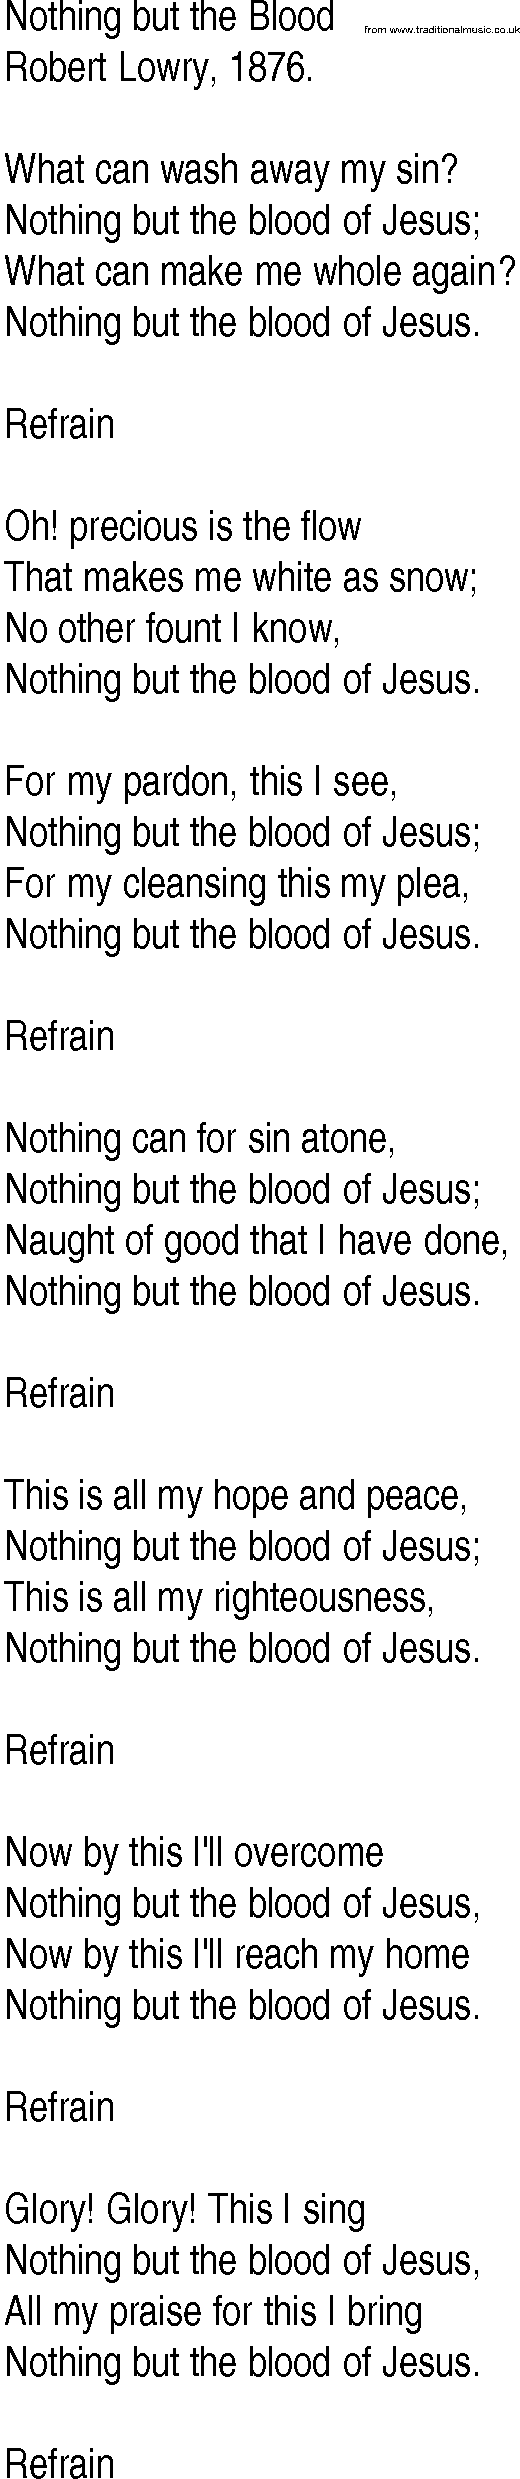 Hymn and Gospel Song: Nothing but the Blood by Robert Lowry lyrics